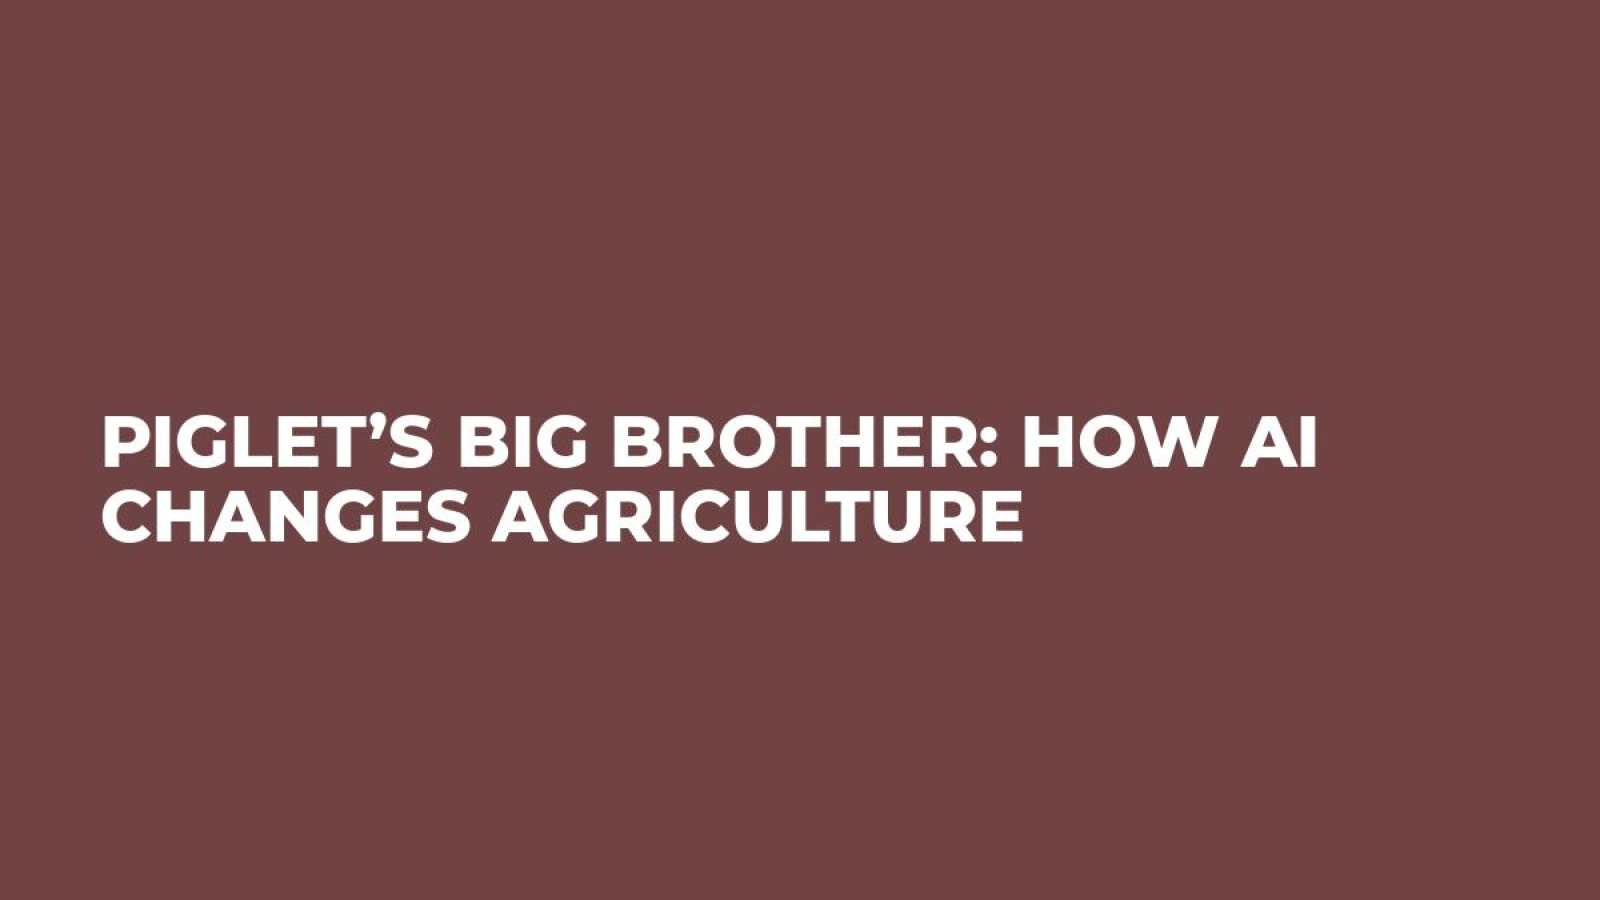 Piglet’s Big Brother: How AI Changes Agriculture